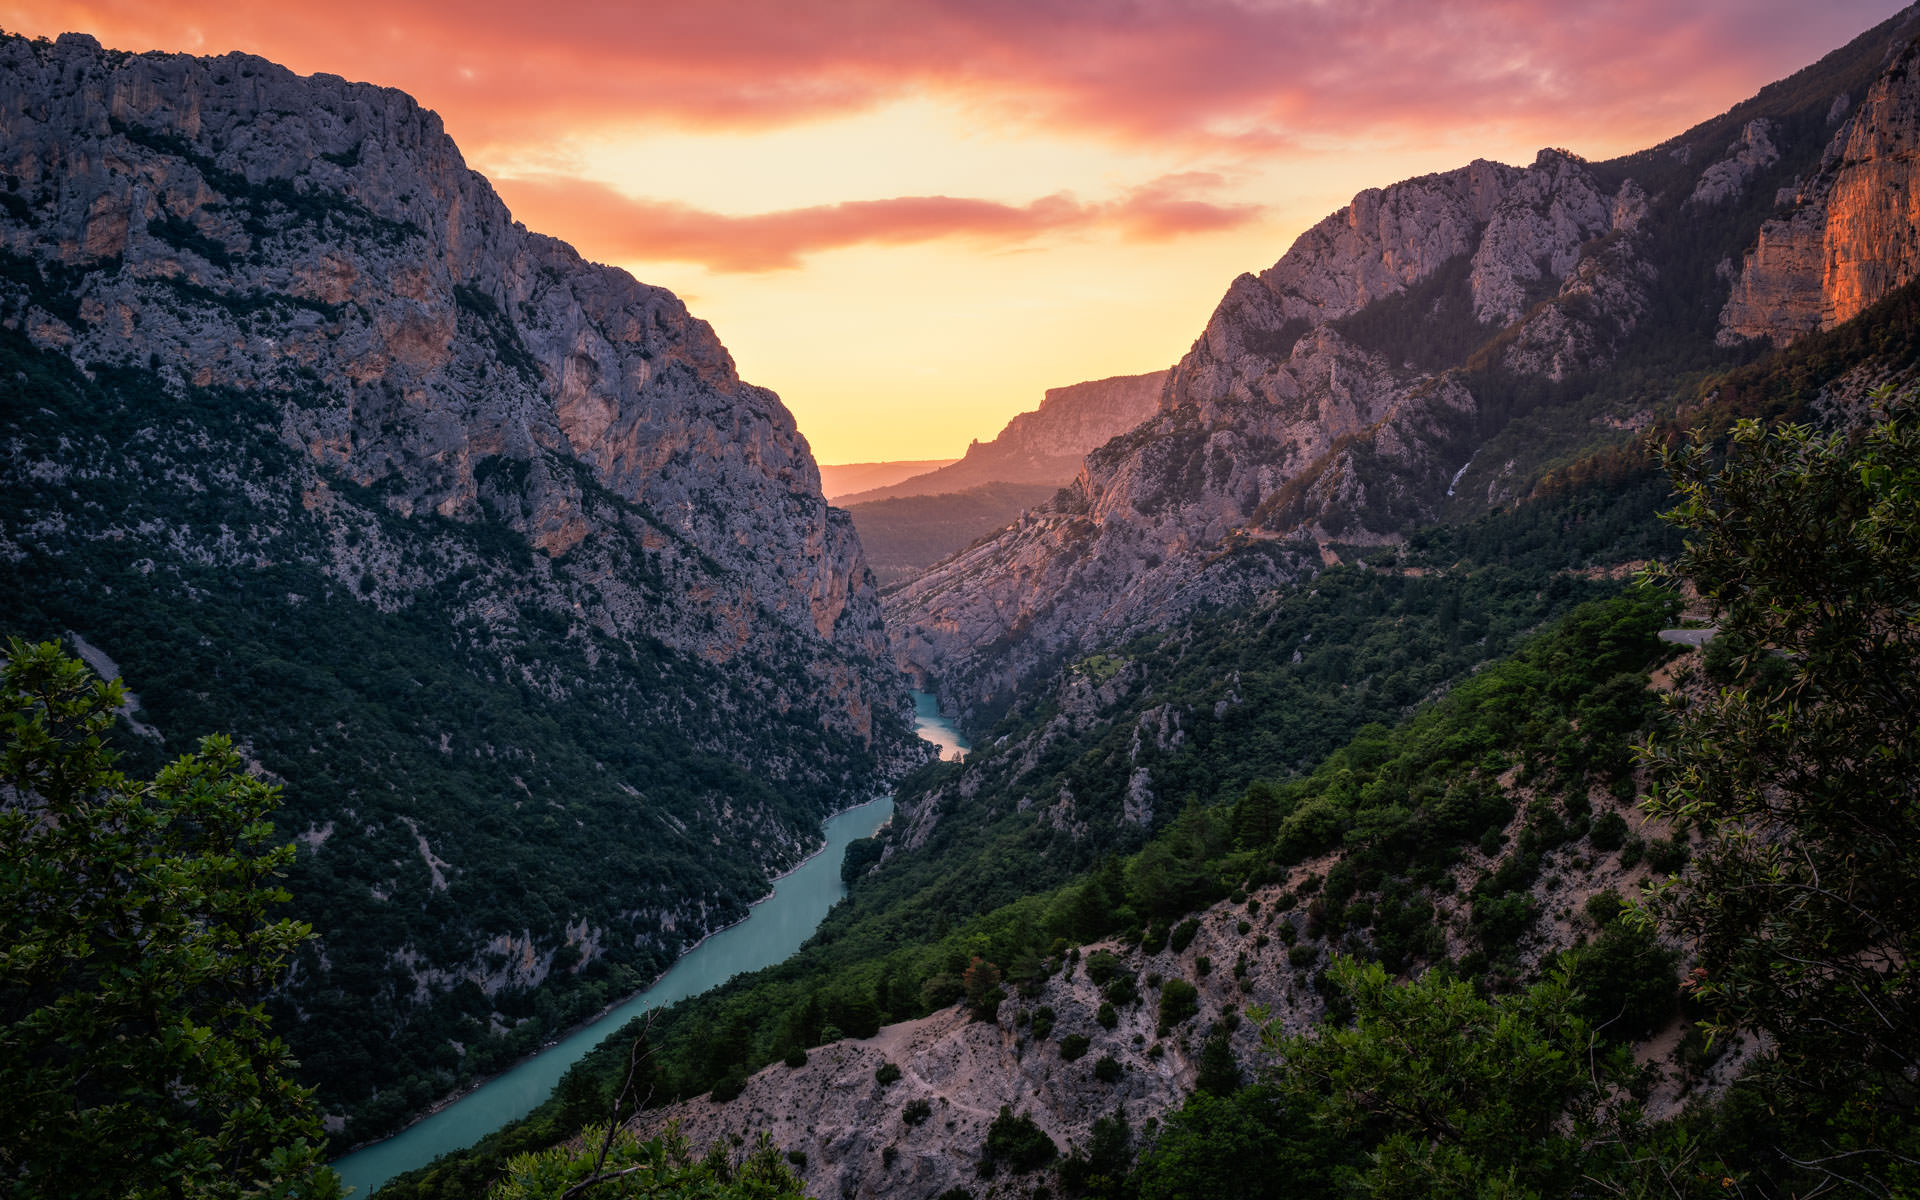 Sunset at Verdon Canyon - Landscape Photography in Provence, France